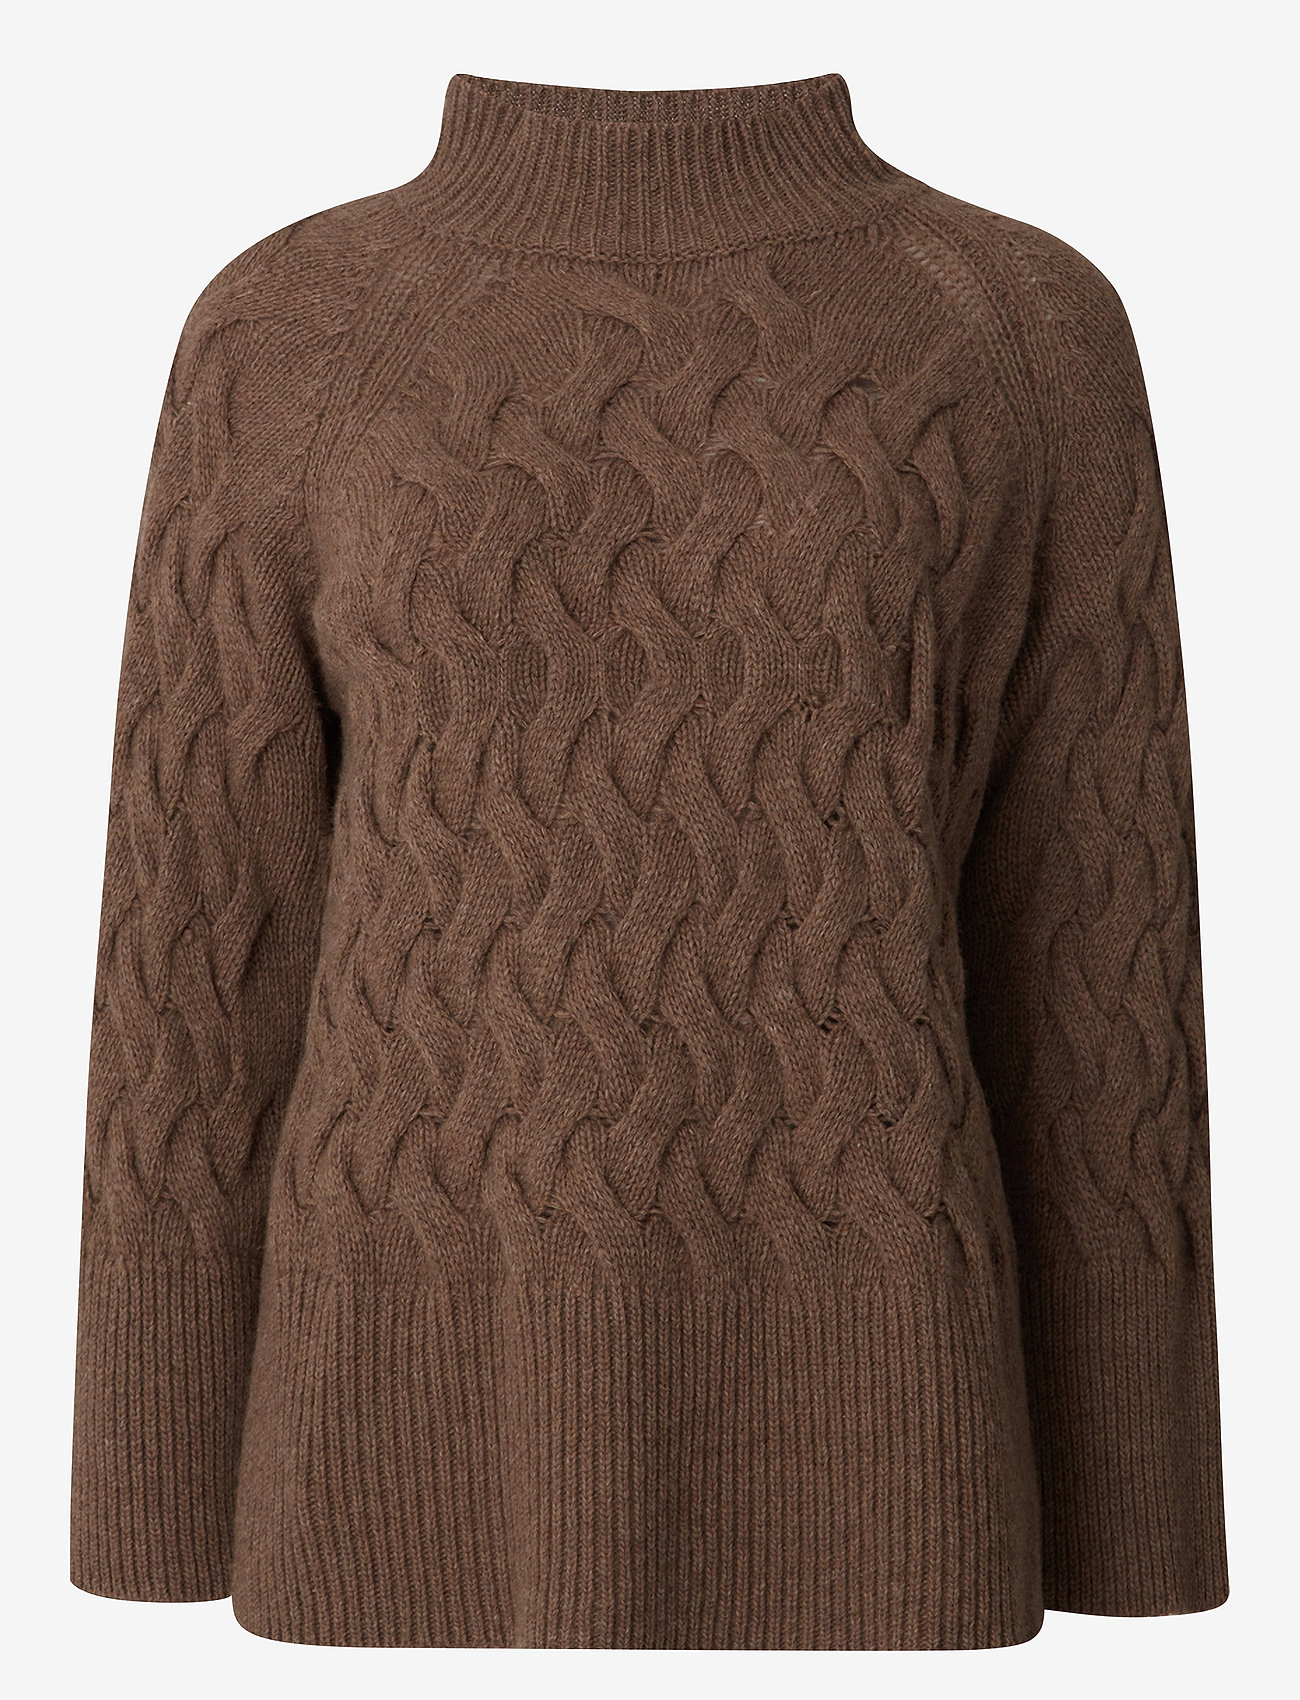 Lexington Clothing - Elisabeth Recycled Wool Mock Neck Sweater - jumpers - light brown - 0